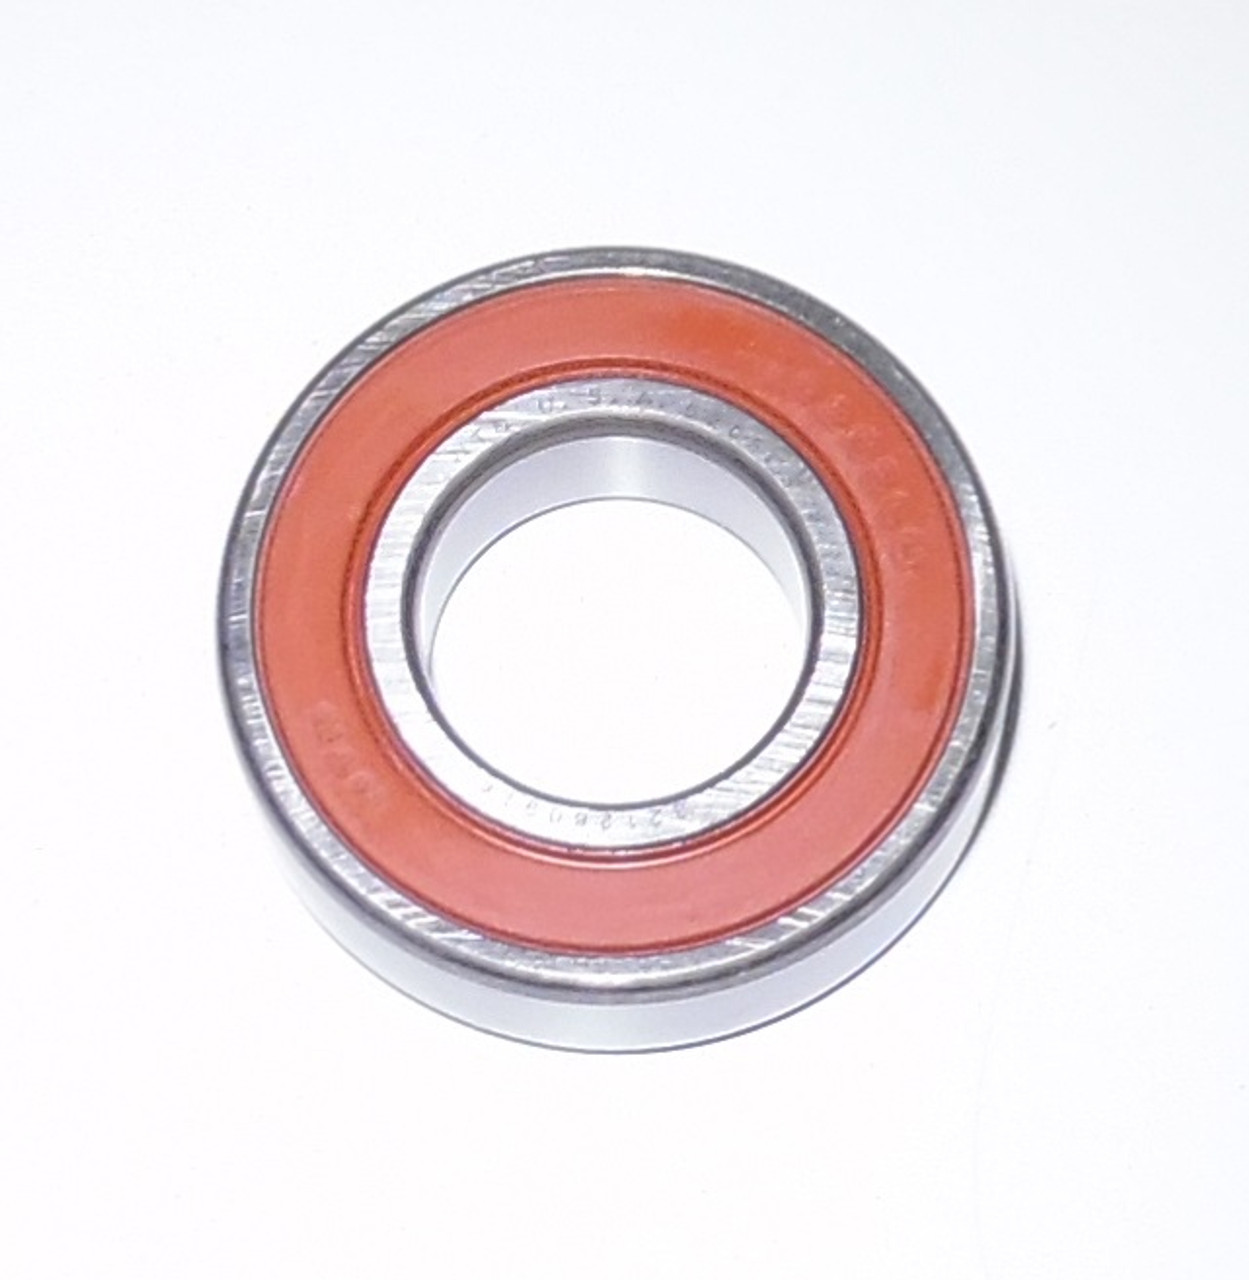 Grasshopper 110081 Ball Bearing Reg Seal 25 mm replaces 110080 and 110082 (EACH)